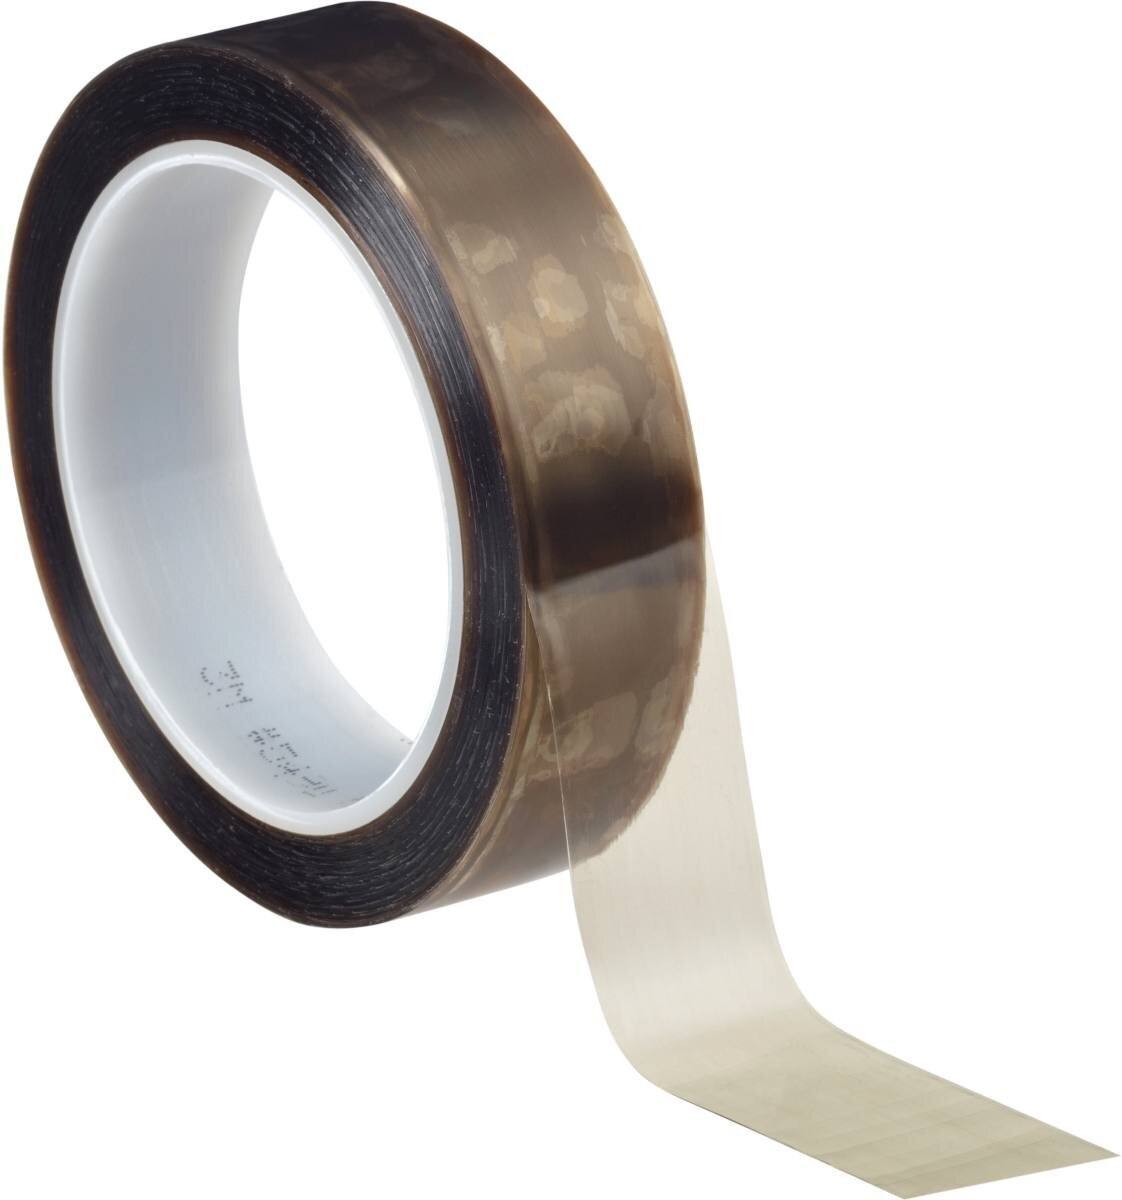 3M 5491 PTFE extruded film adhesive tape 50mmx33m, 0.17mm, silicone